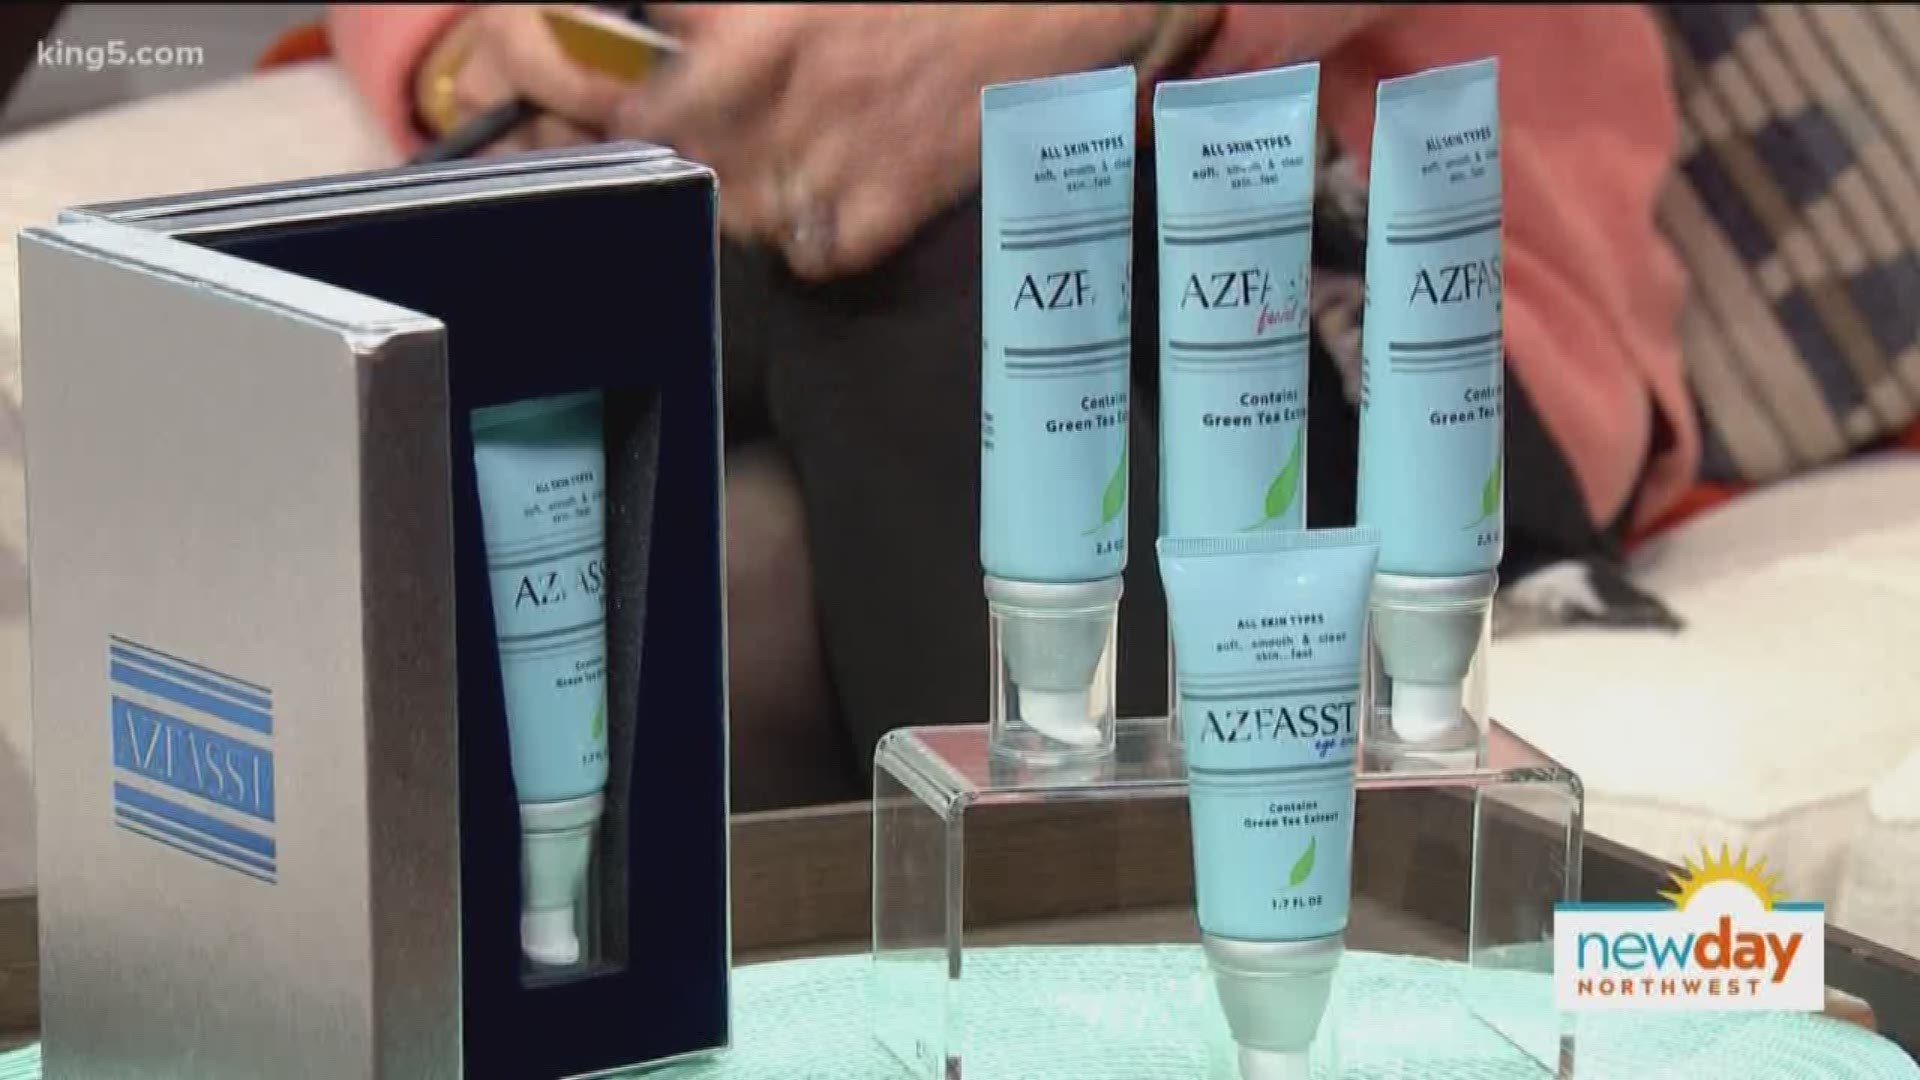 Azfasst has been rejuvenating consumers’ skin for over 10 years. This segment is sponsored by Azfasst.